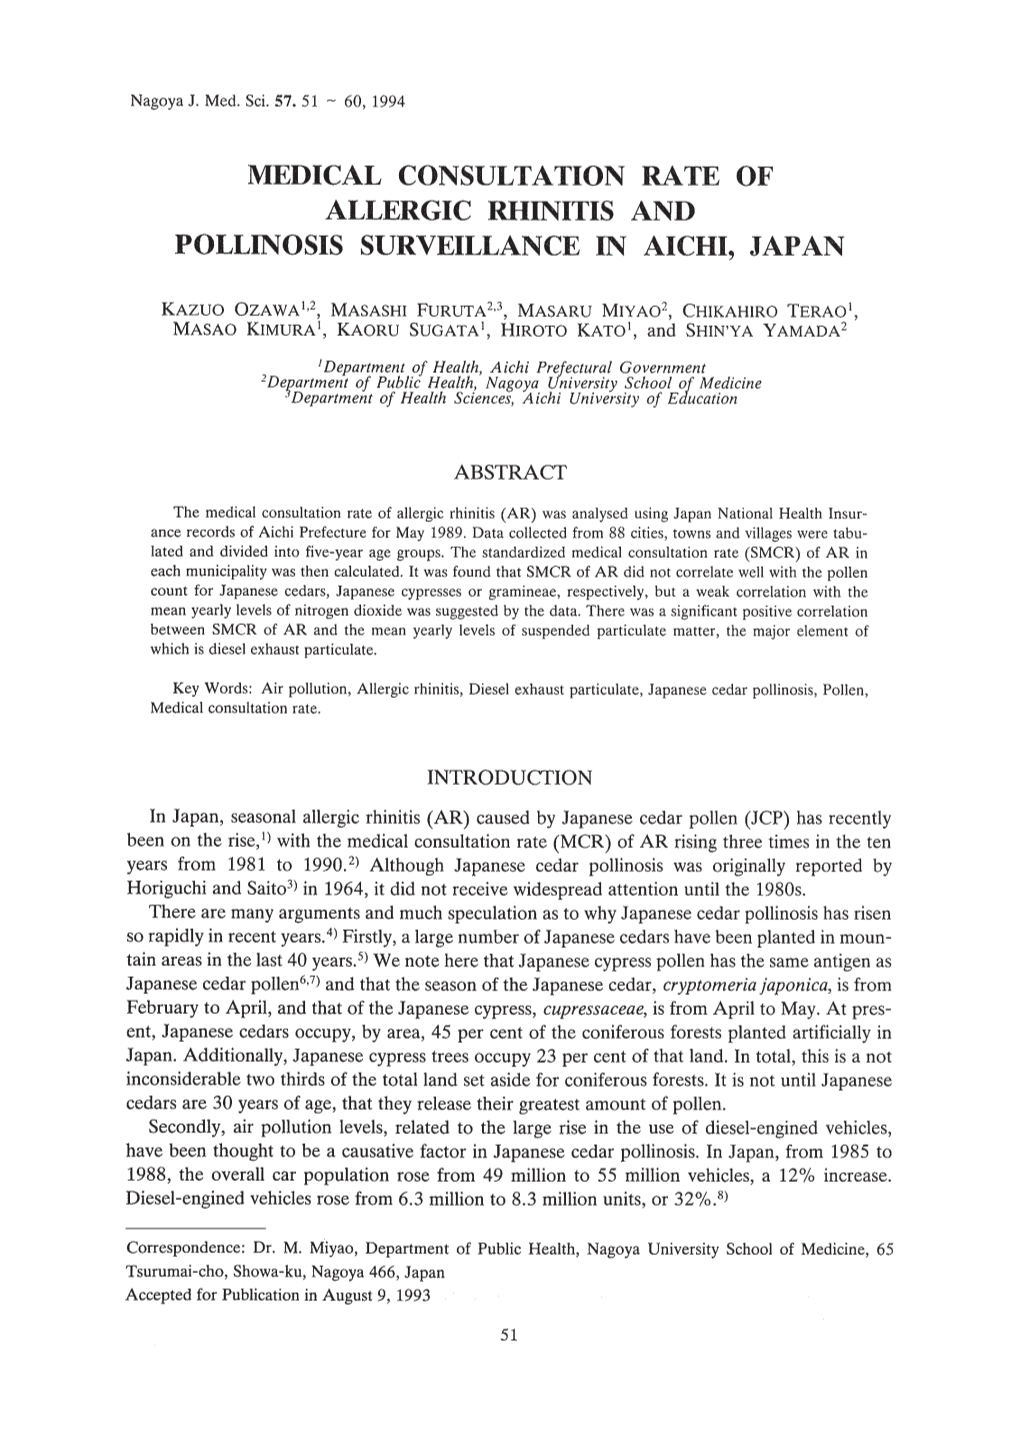 Medical Consultation Rate of Allergic Rhinitis and Pollinosis Surveillance in Aichi, Japan